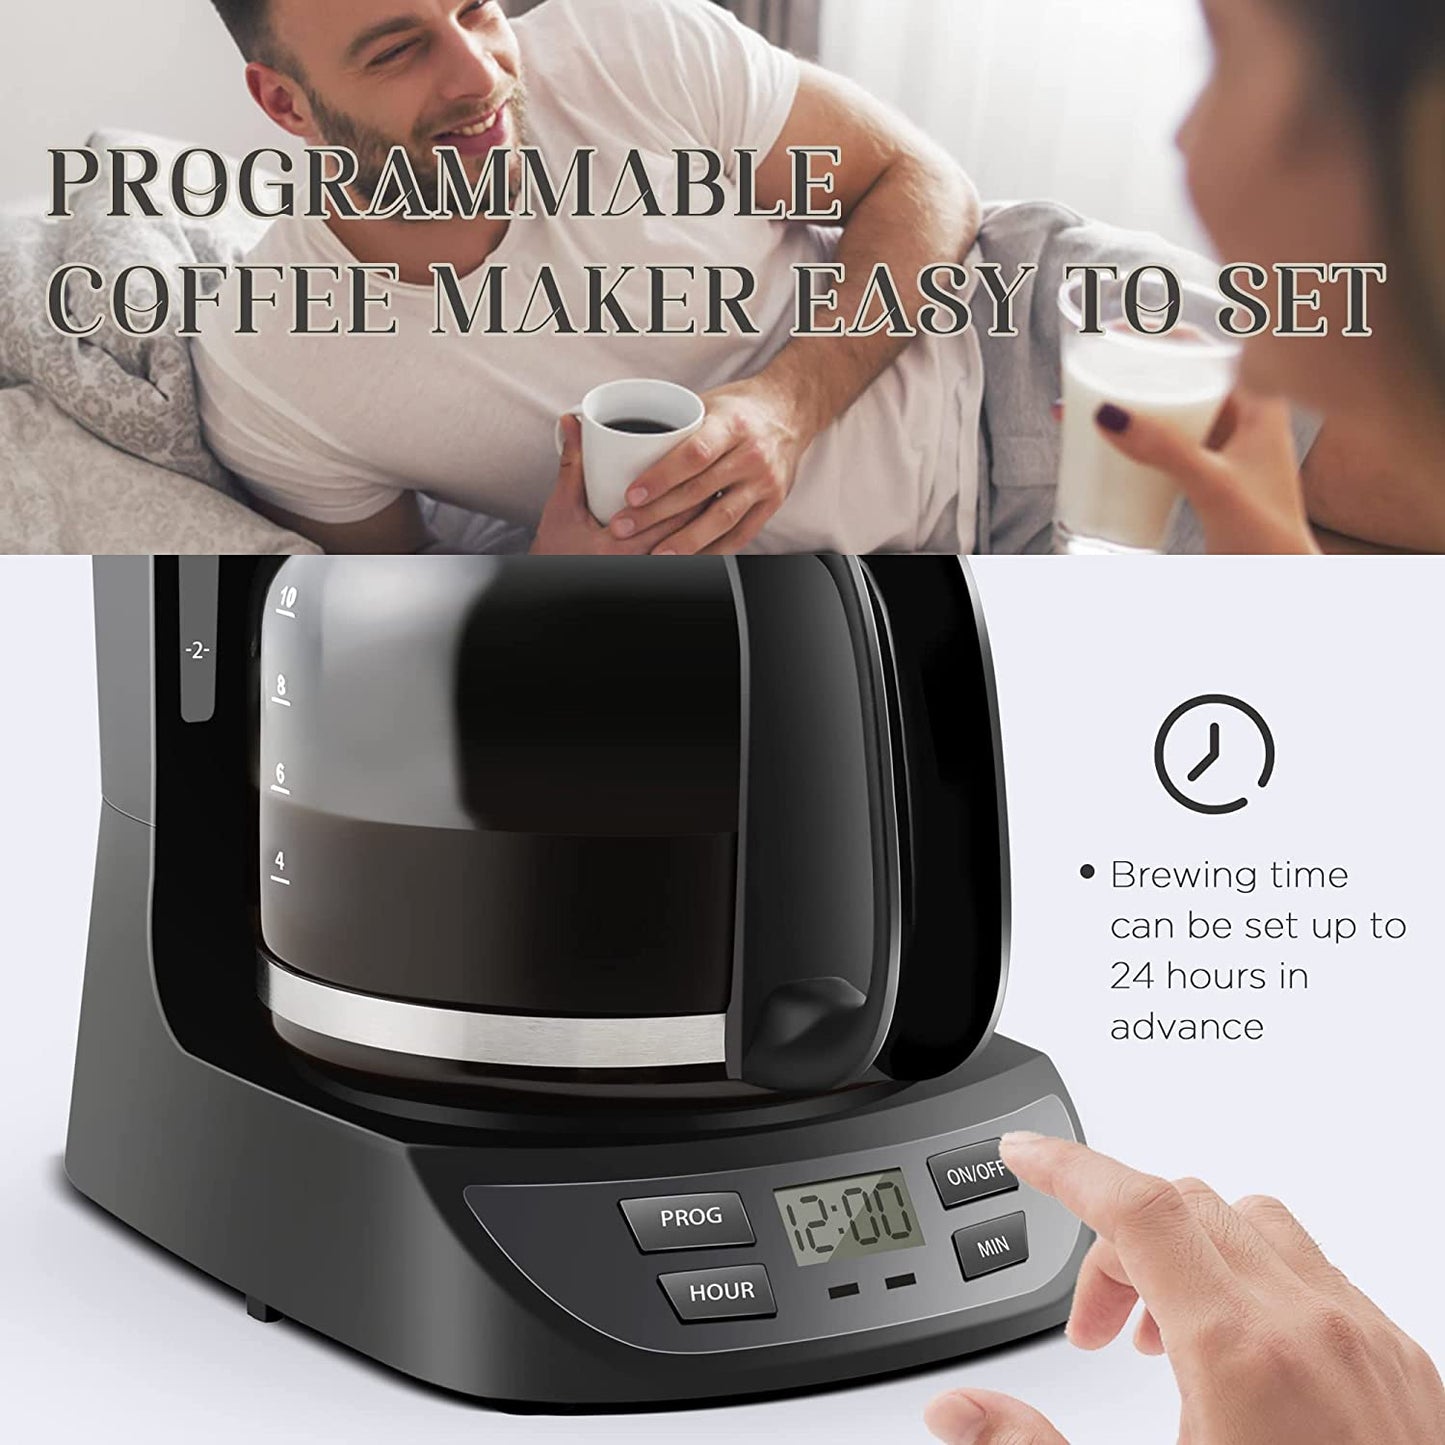 12 Cup Coffee Maker with Swing Out Basket, Programmable Coffee Maker Machine with Glass Carafe, Drip Coffee Pot with Permanent Filter, Keep Warm Function, Auto Pause & Serve, 900W, Black